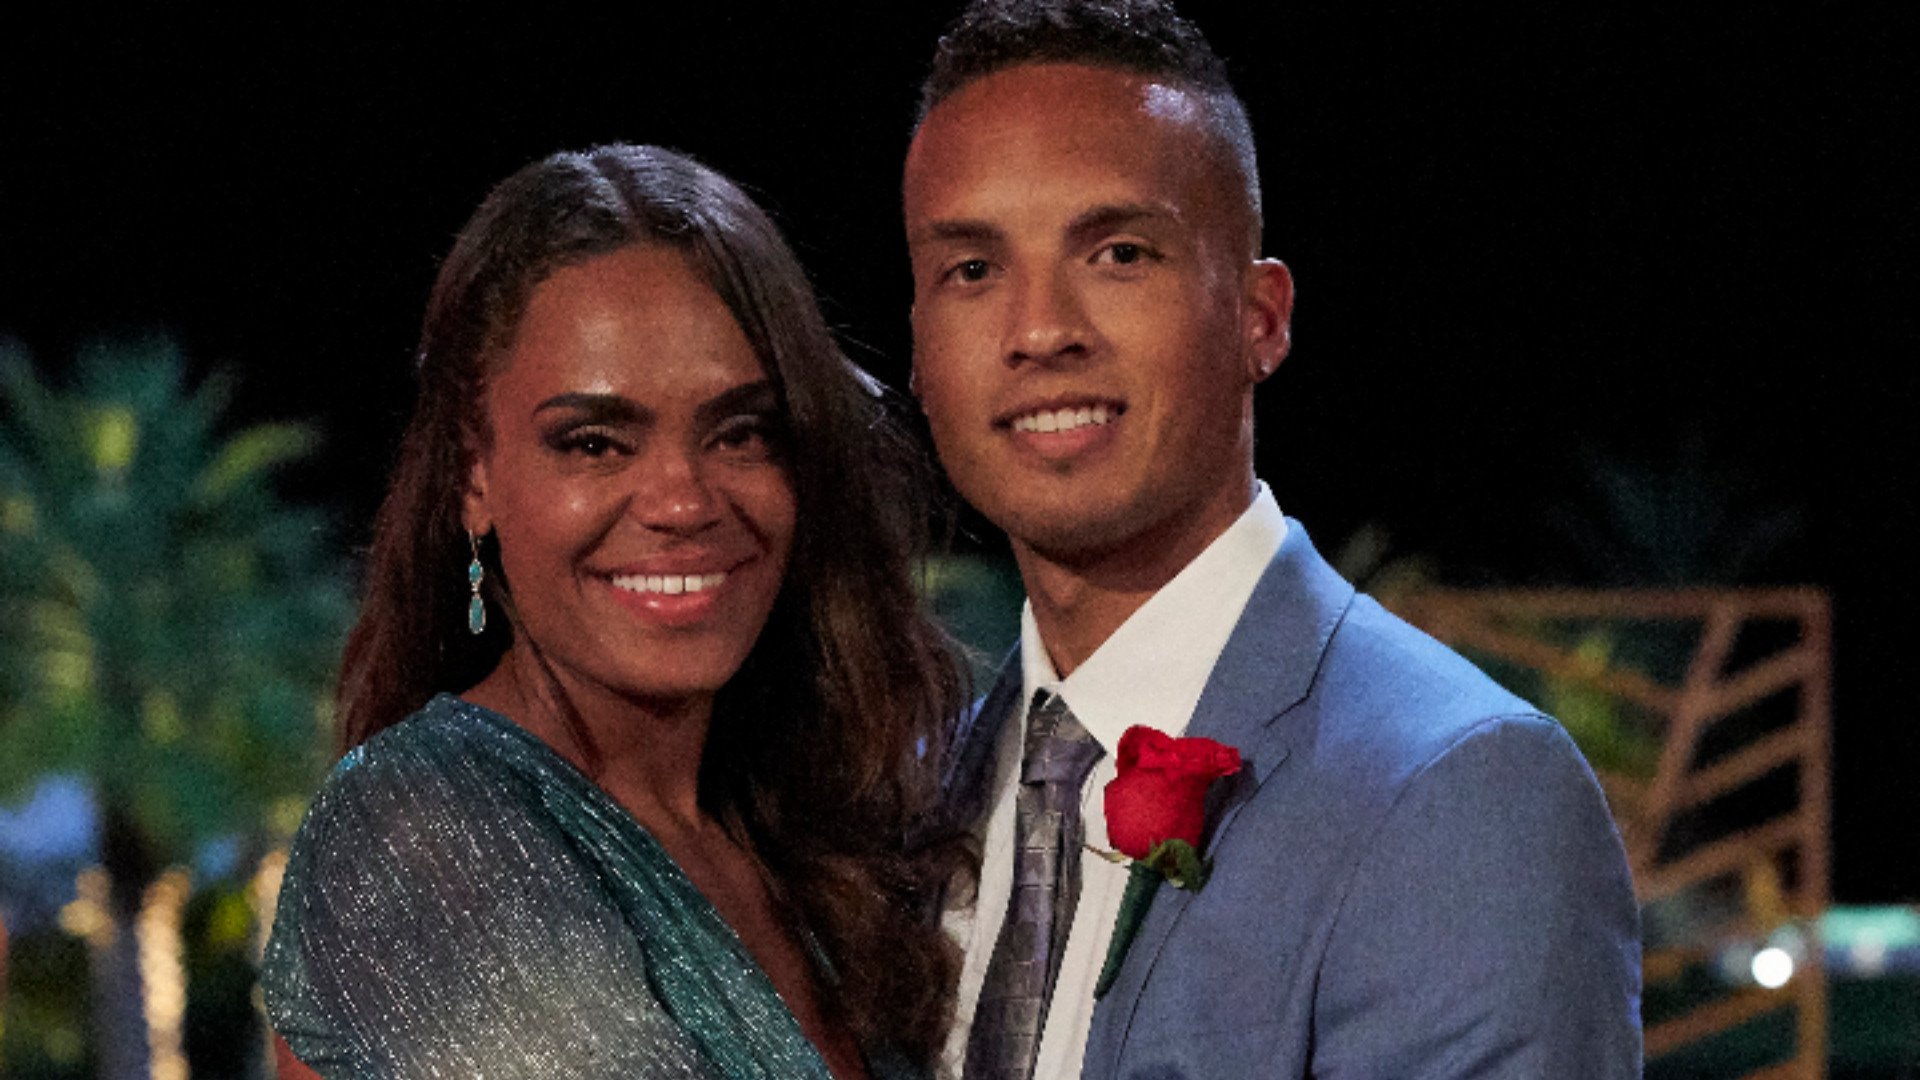 Michelle Young and Brandon Jones pose together after the final two rose ceremony in ‘The Bachelorette’ Season 18